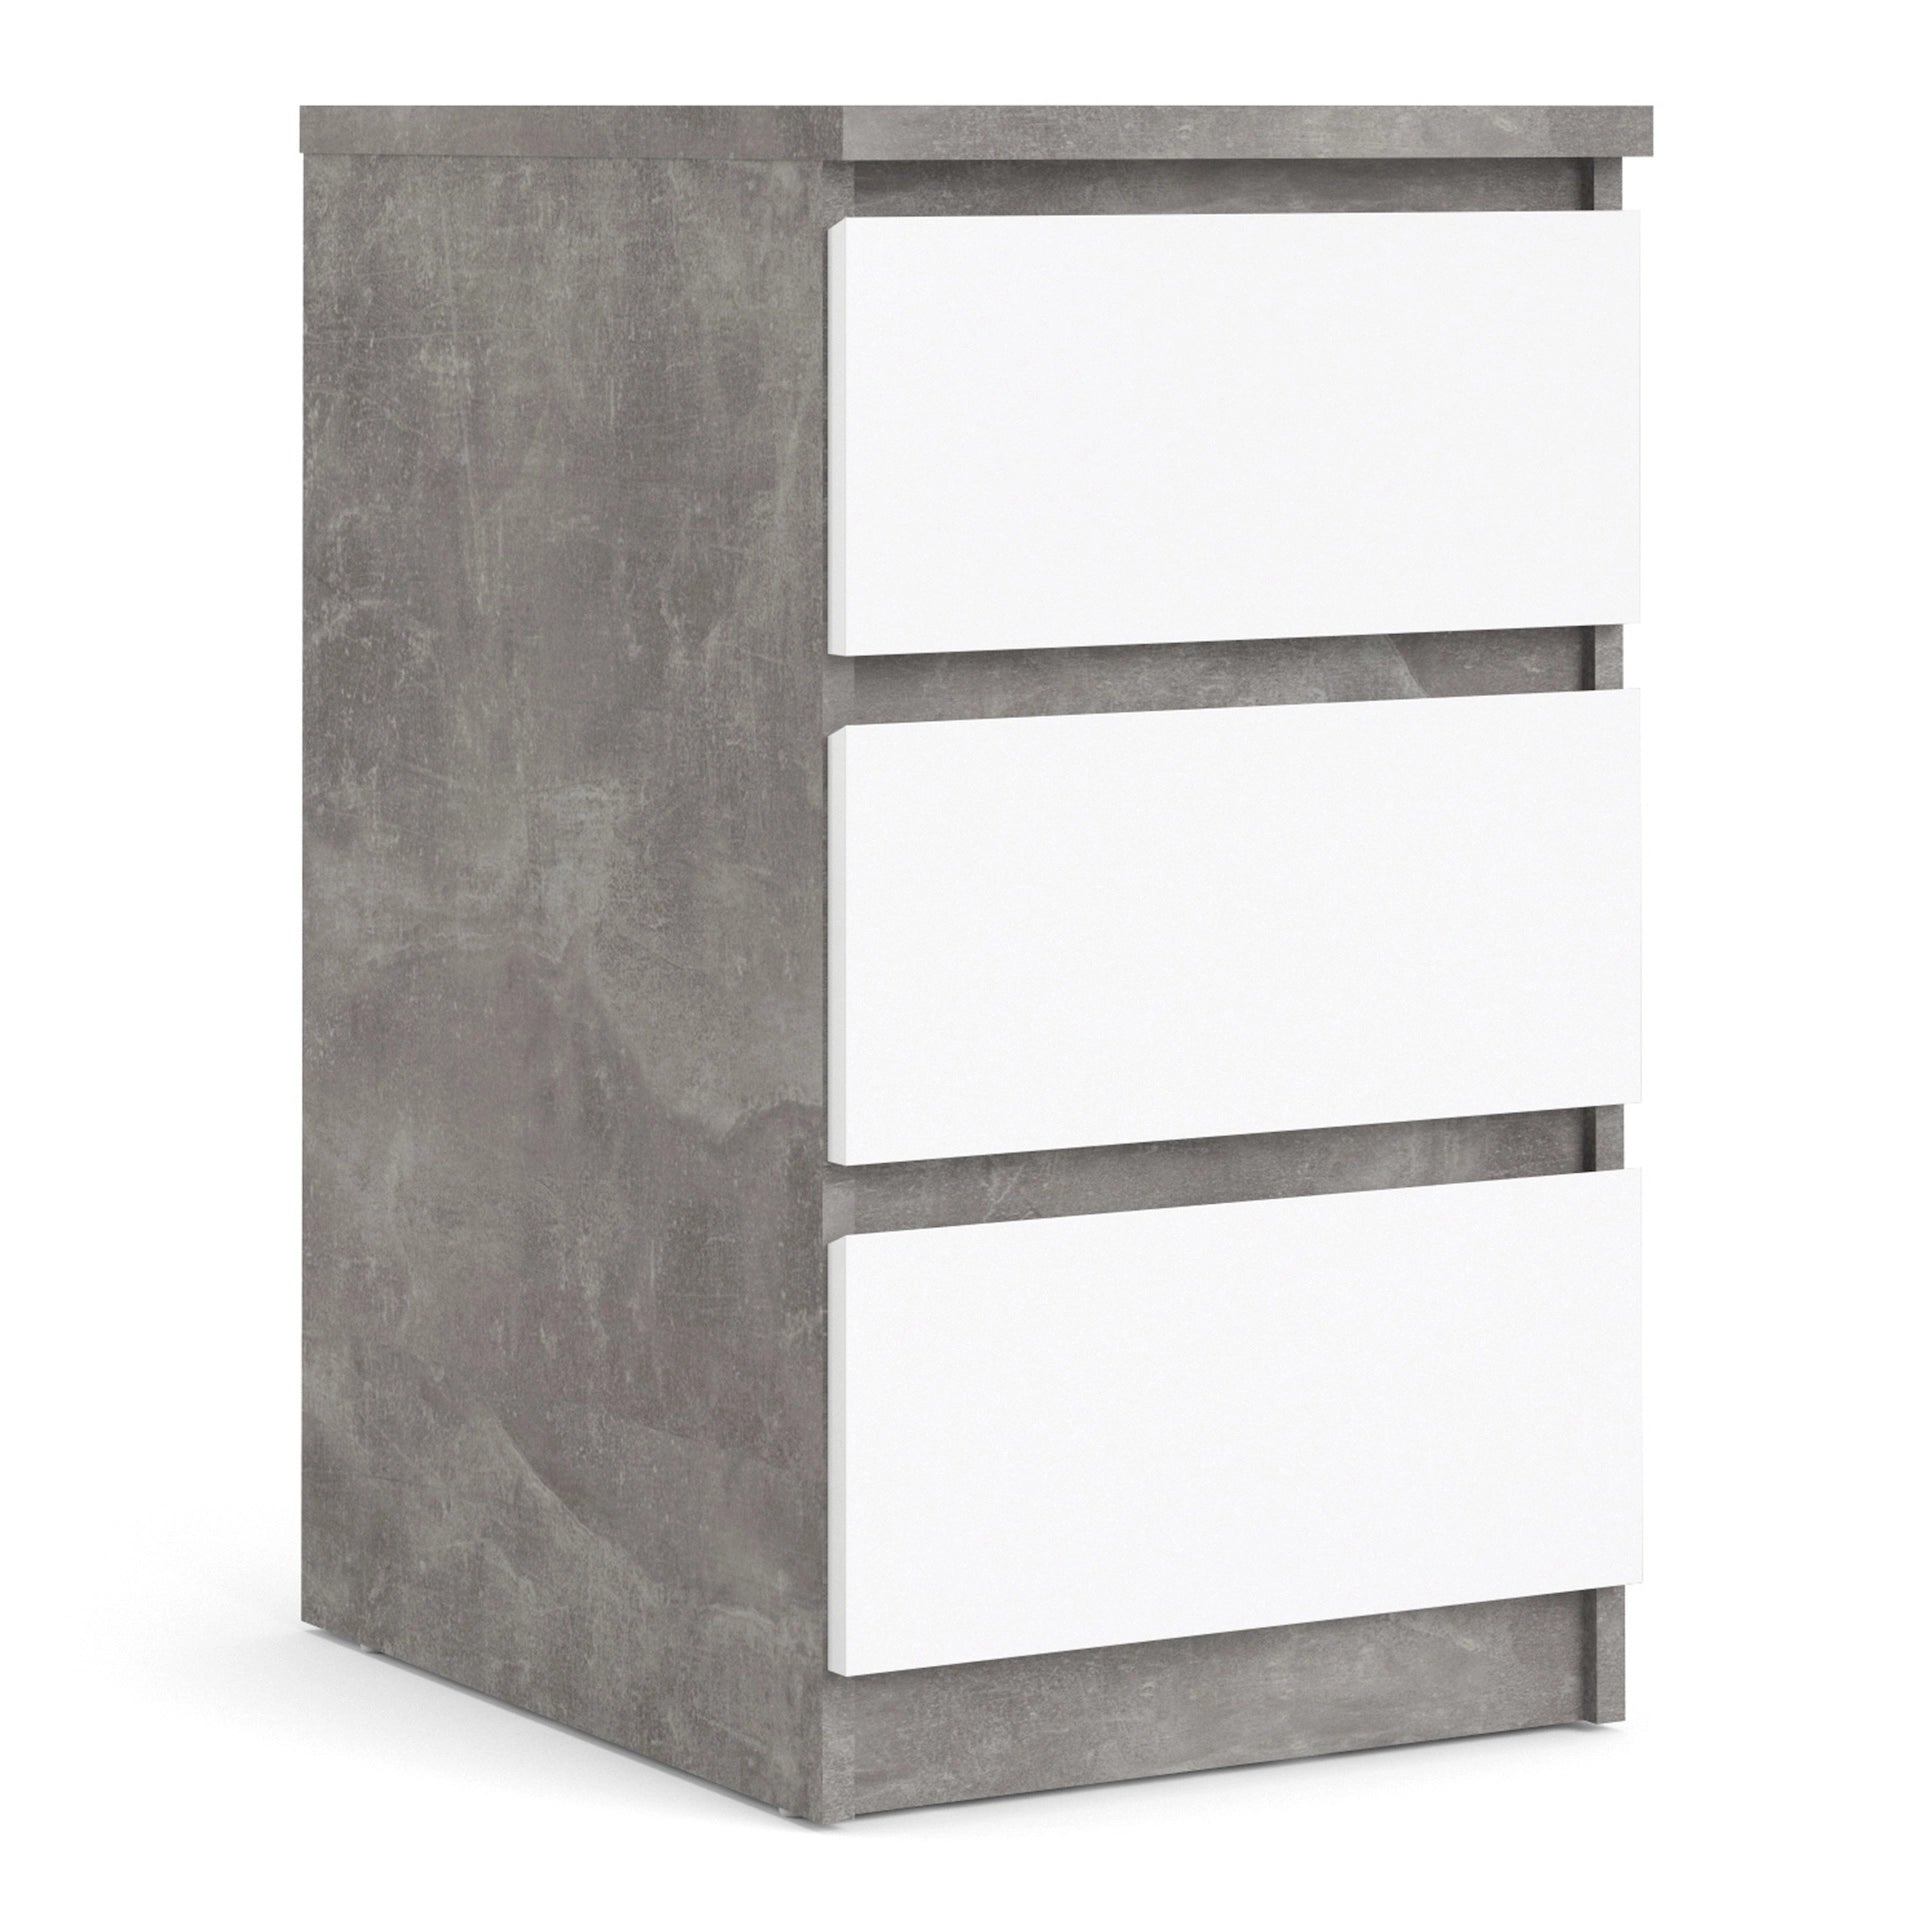 Furniture To Go Naia Bedside 3 Drawers in Concrete & White High Gloss